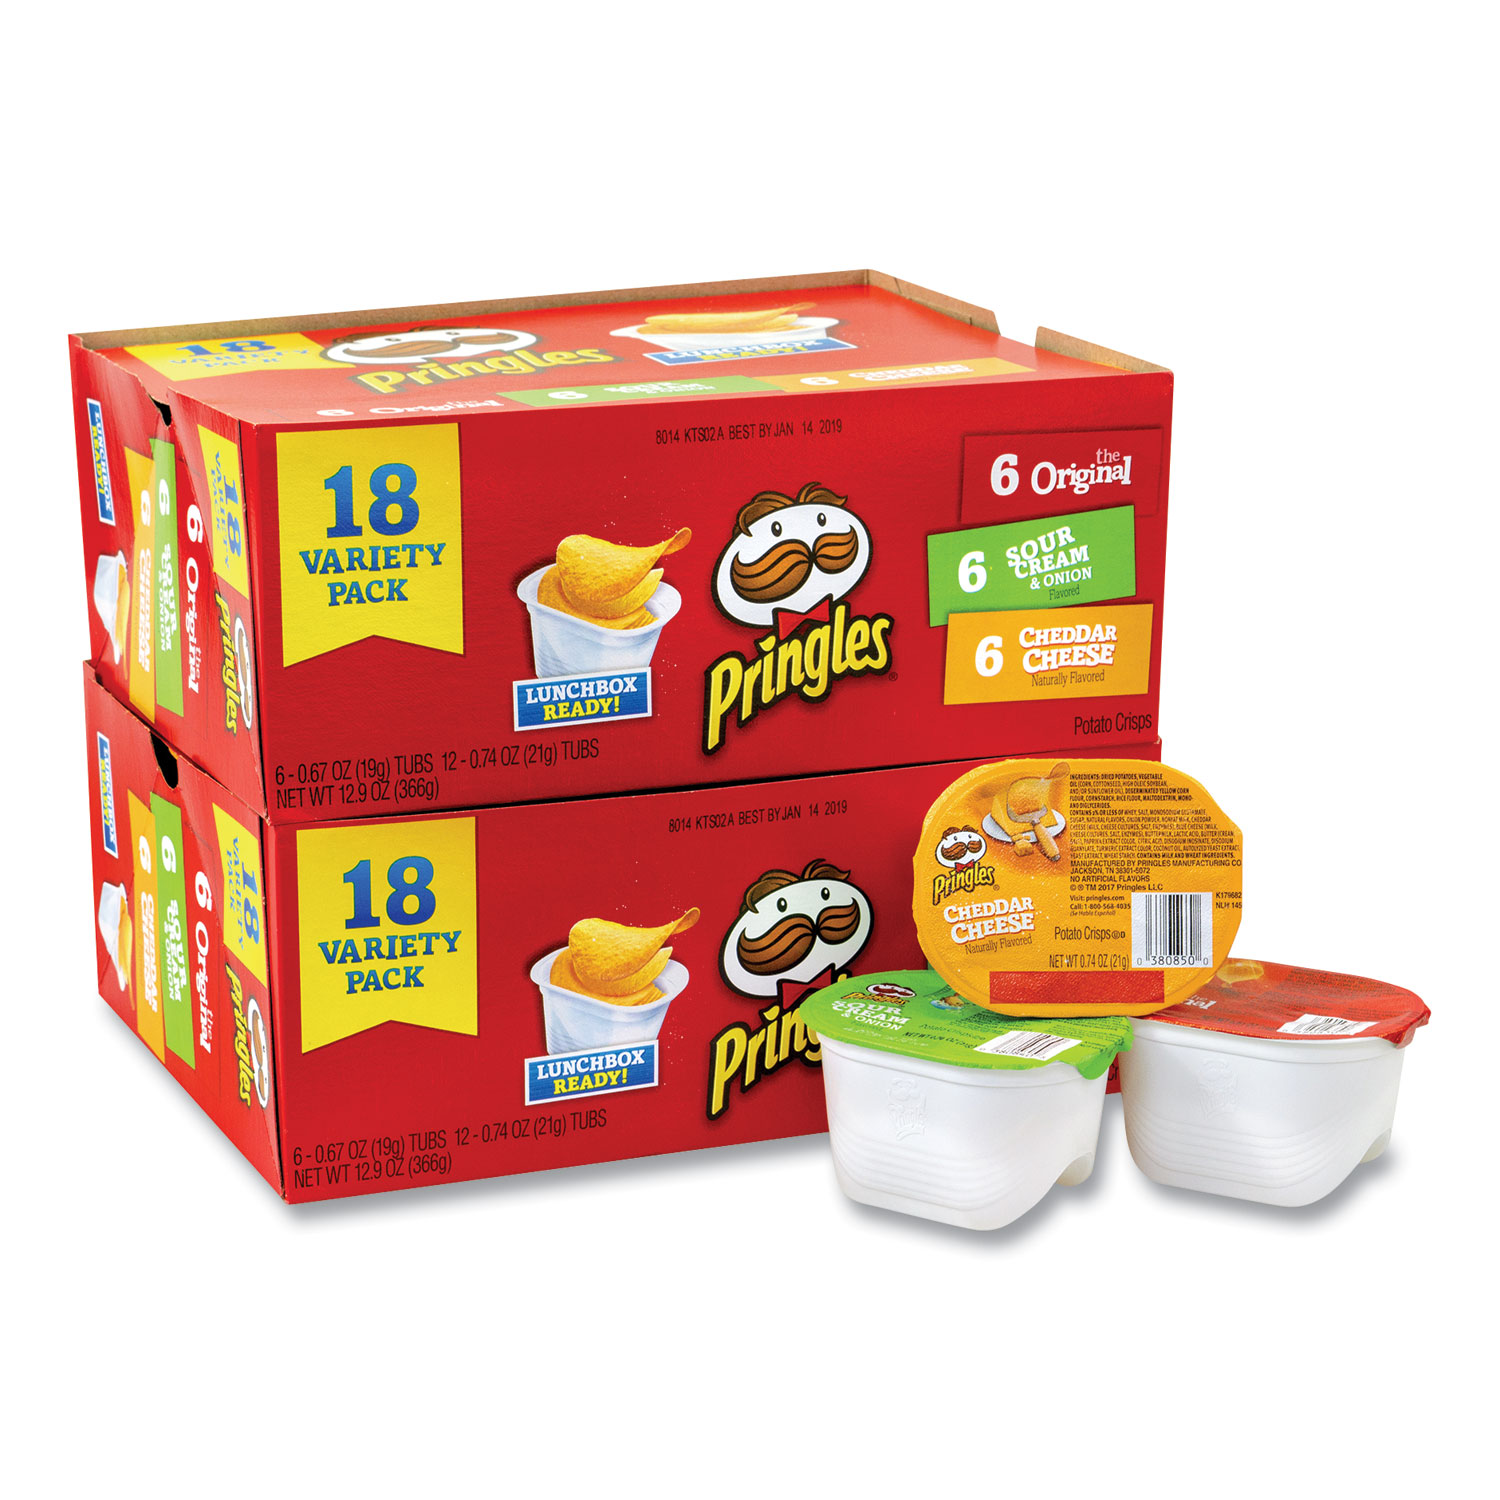  Pringles 84637 Potato Chips, Assorted, 0.67 oz Tub, 18 Tubs/Box, 2 Boxes/Carton, Free Delivery in 1-4 Business Days (GRR22000407) 